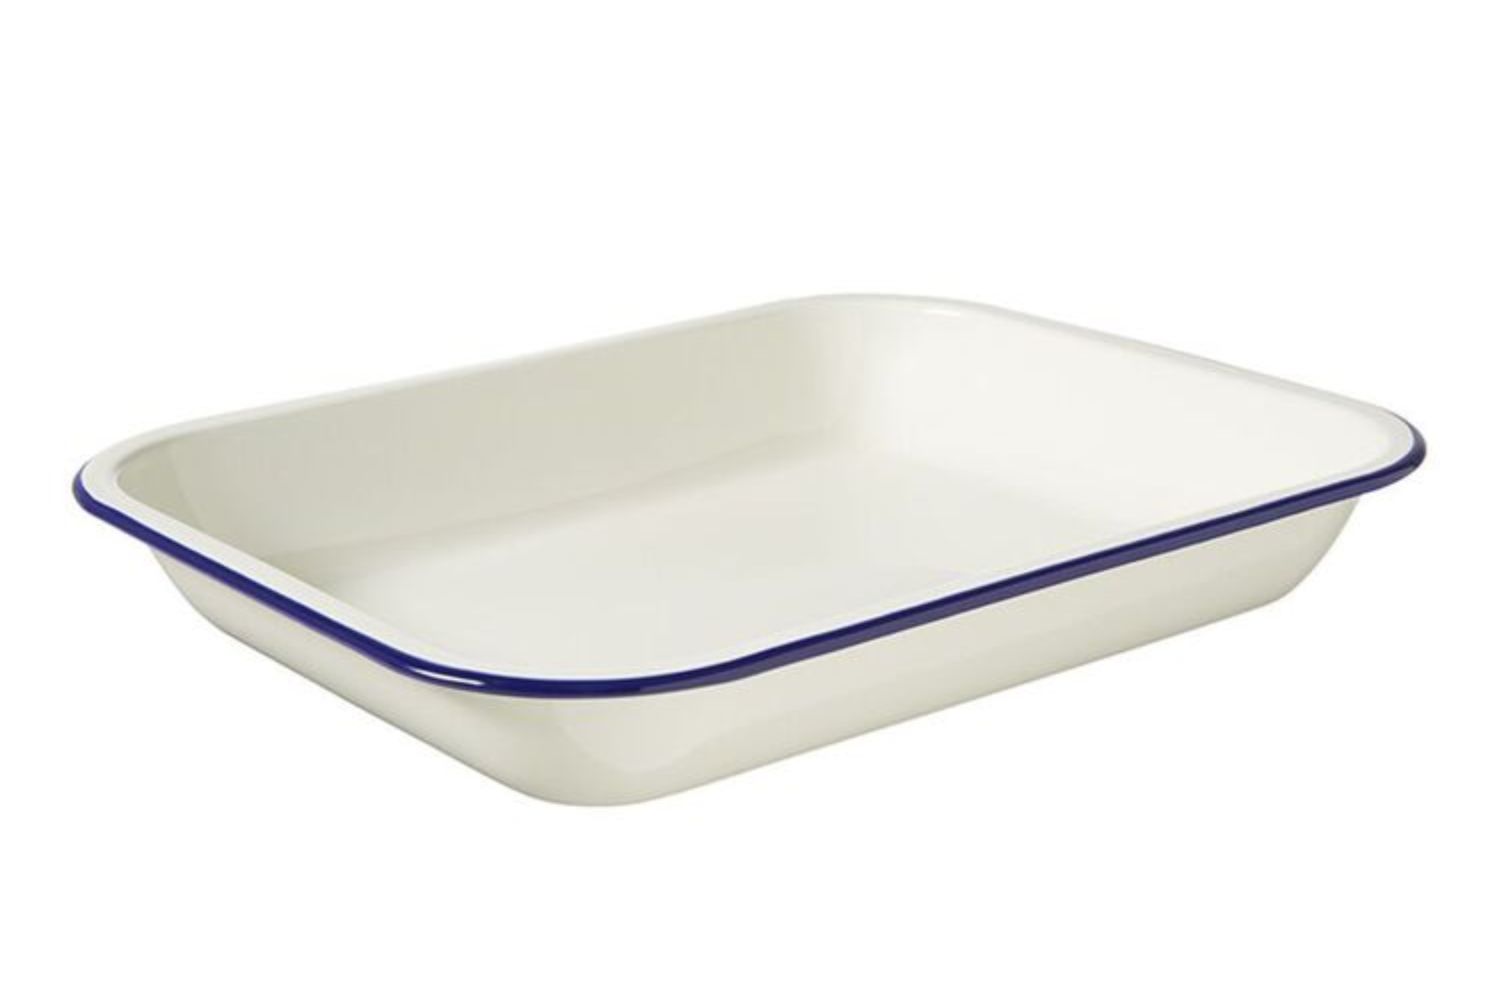 wiltshire-white-and-blue-ovenproof-dish